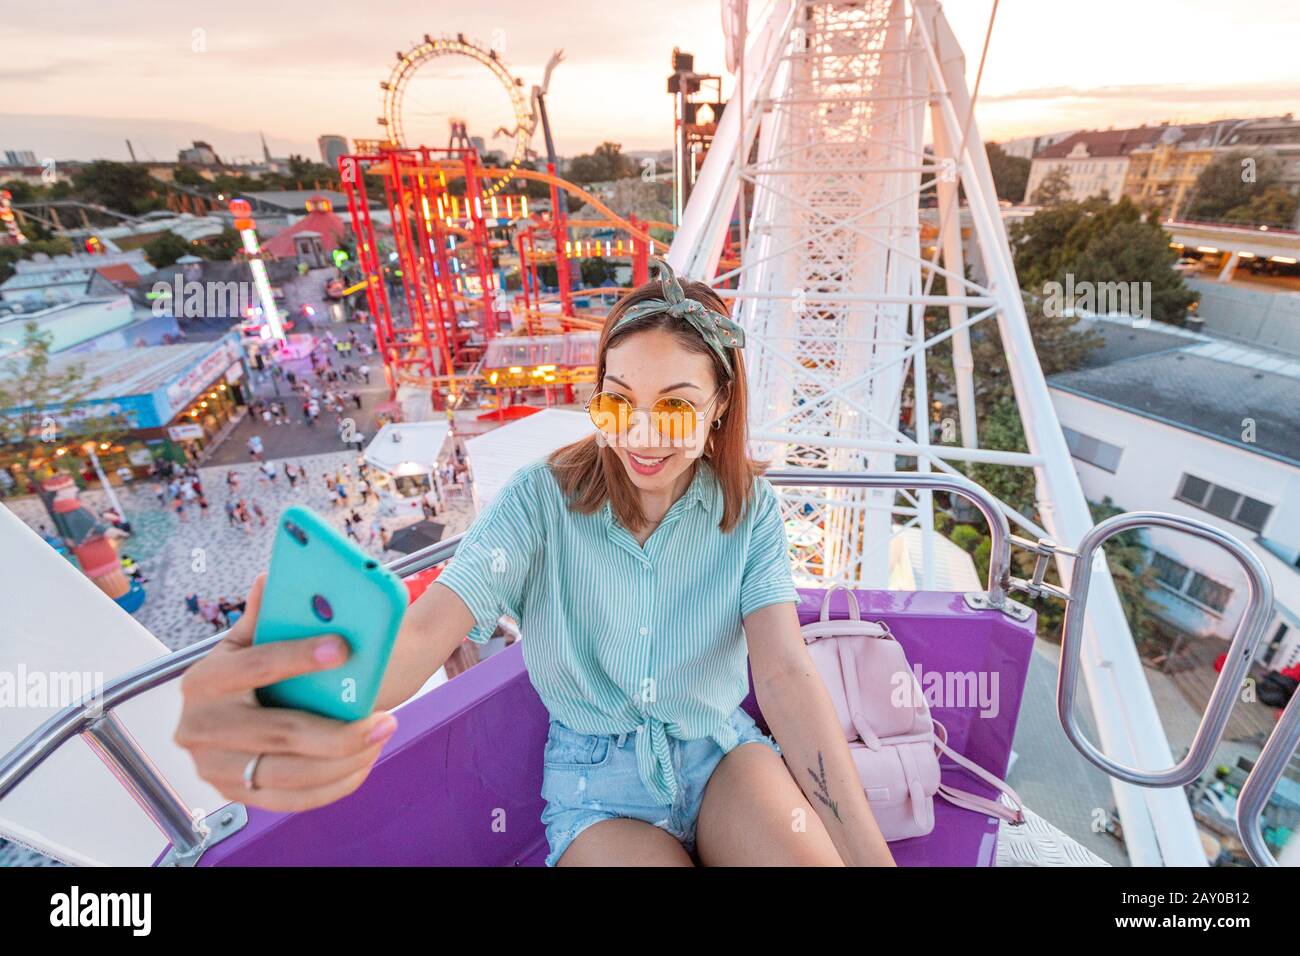 Happy asian woman smiling and taking selfie photo on a ferris wheel Stock Photo